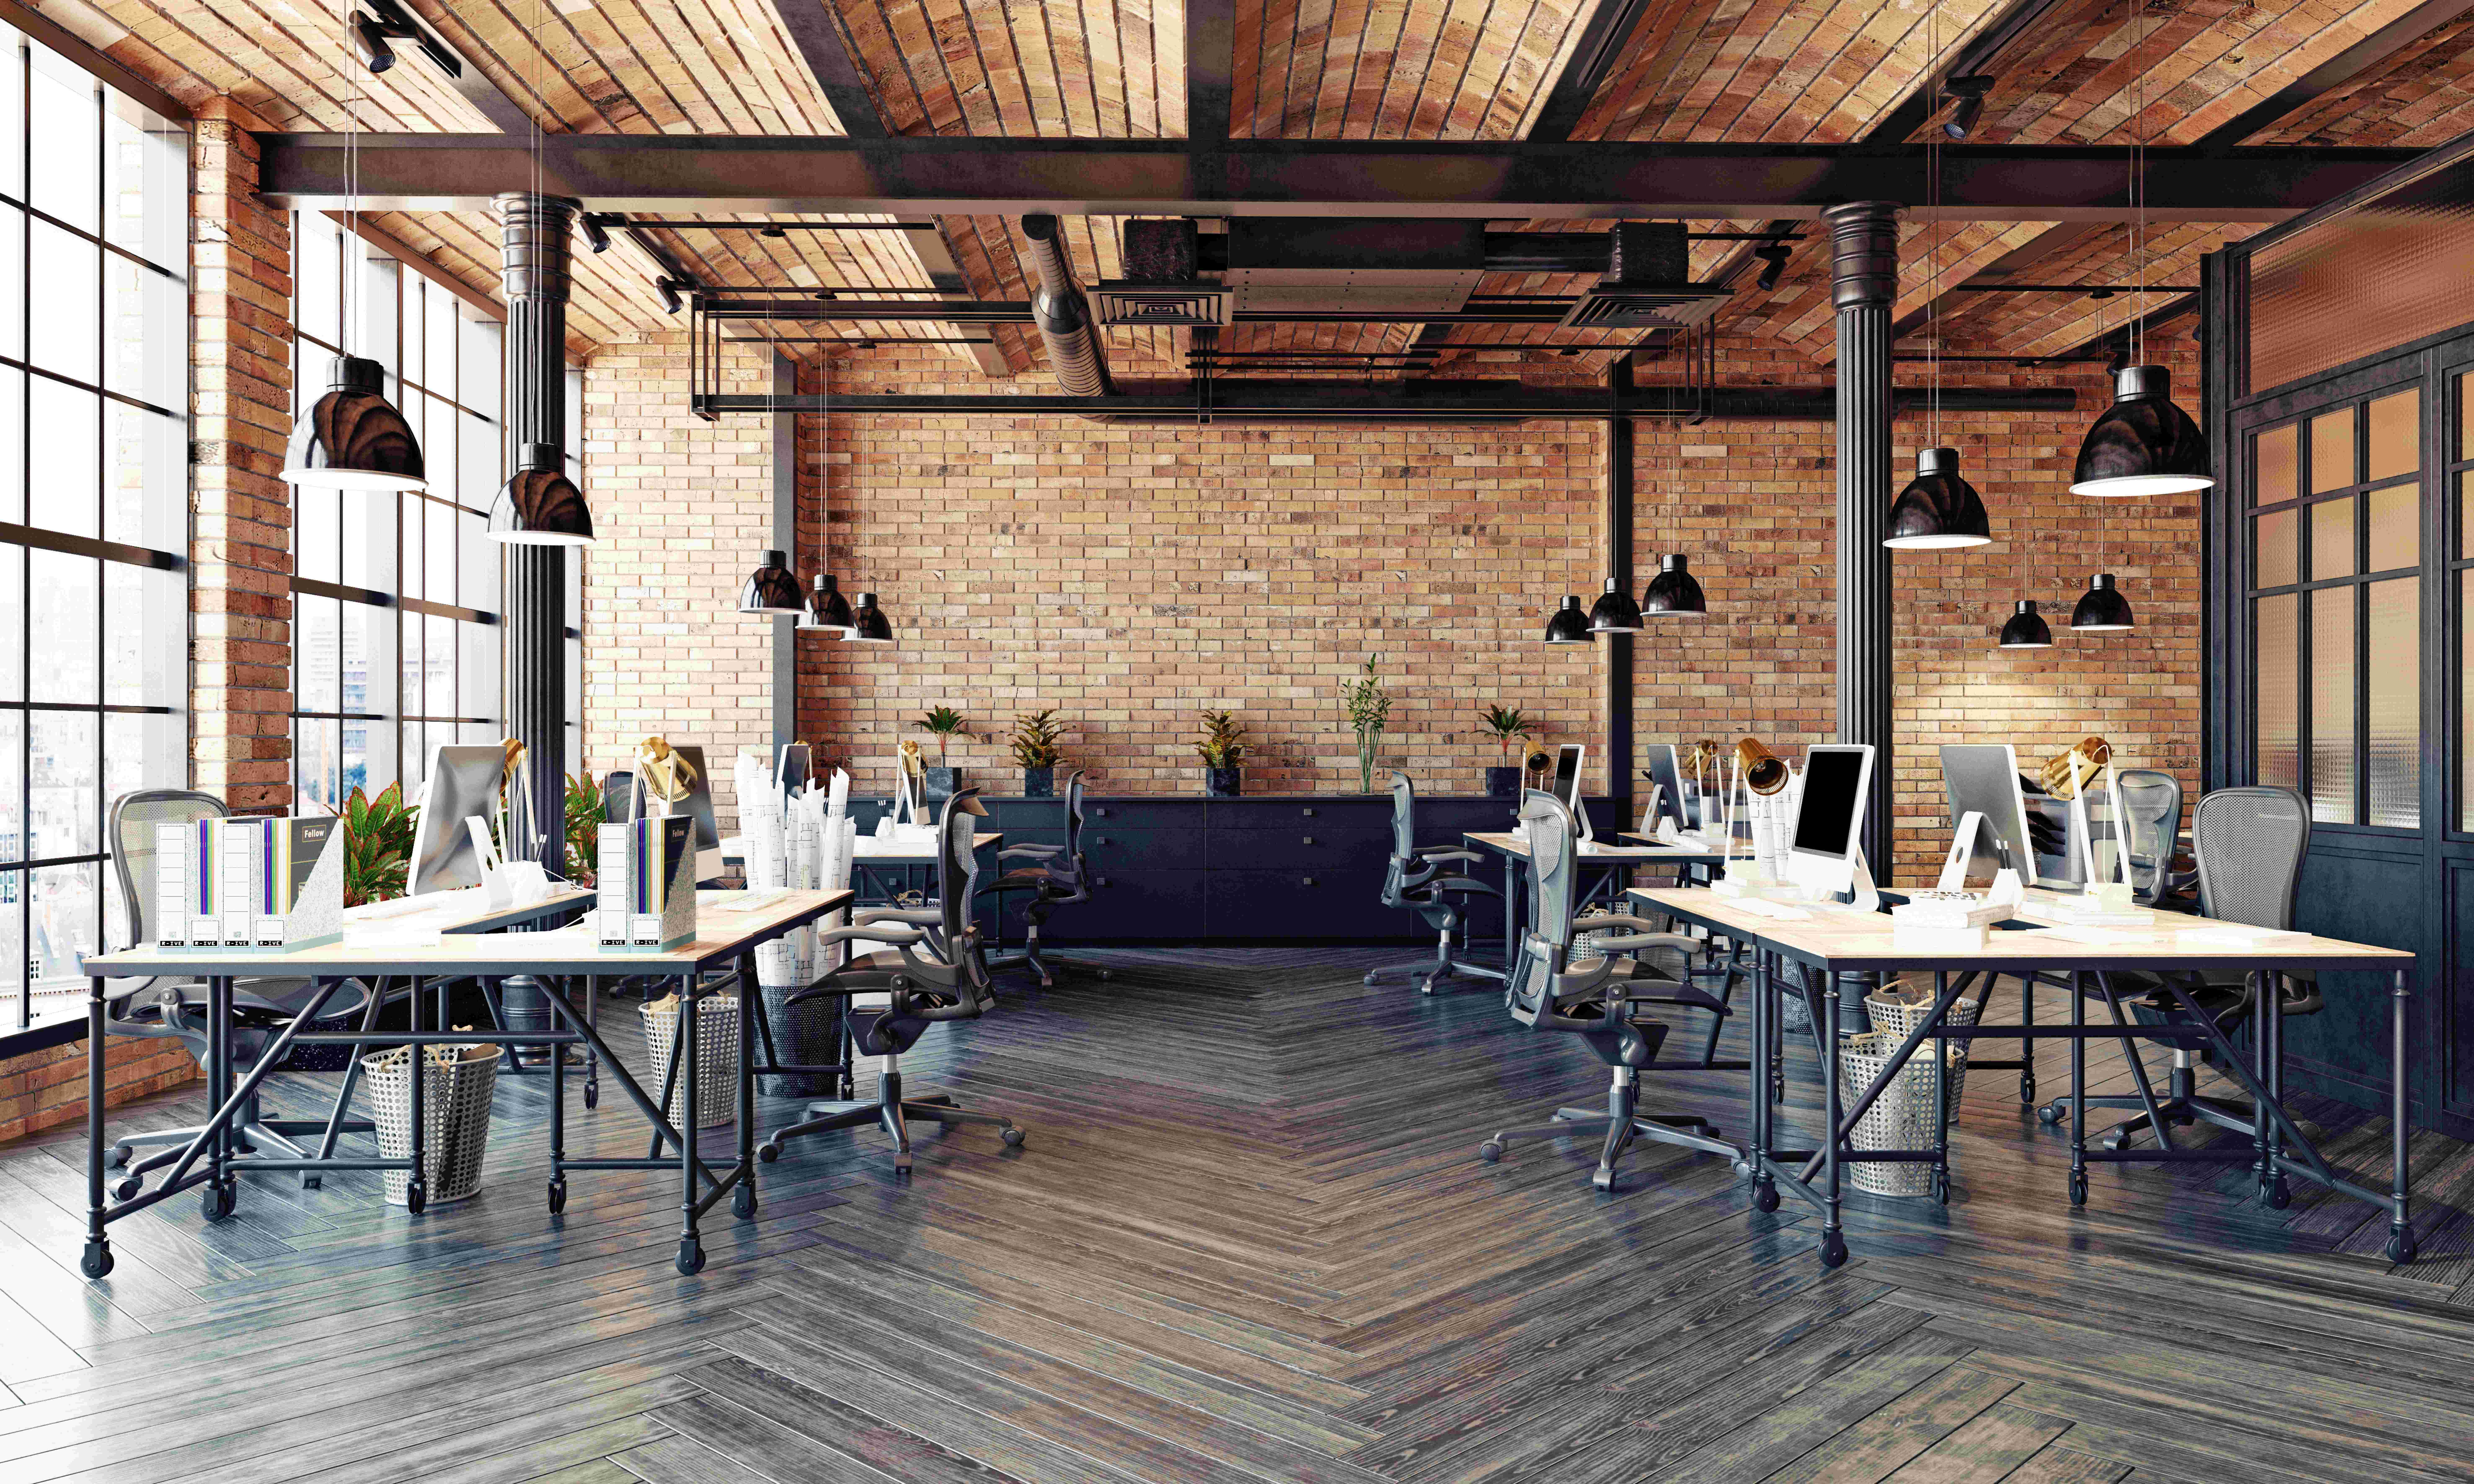 A modern office space with herringbone hardwood floors, brick walls, tall windows and doors, and collaborative workstations.